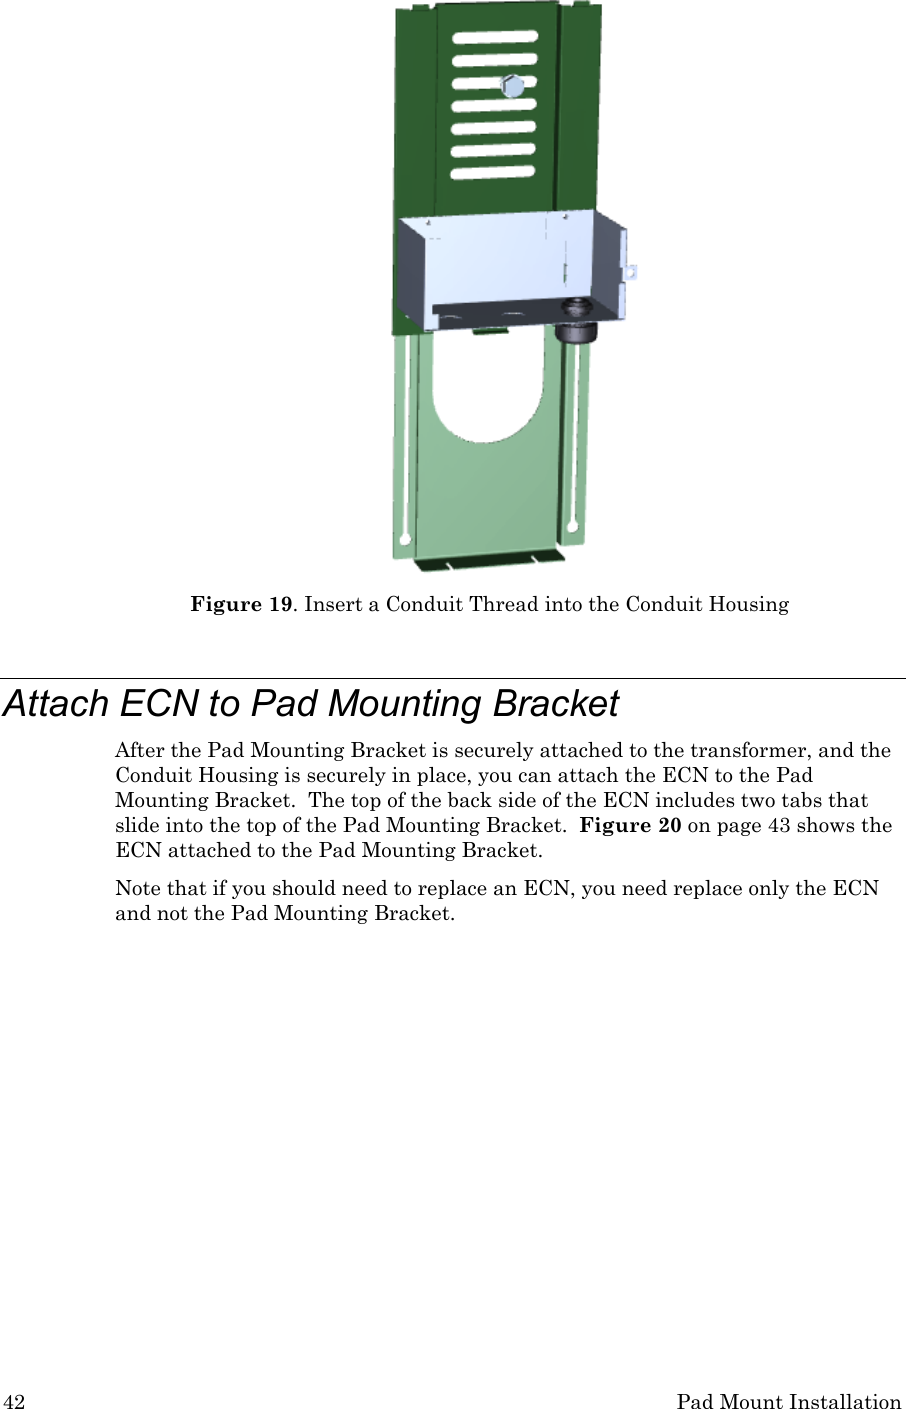 42 Pad Mount Installation  Figure 19. Insert a Conduit Thread into the Conduit Housing  Attach ECN to Pad Mounting Bracket After the Pad Mounting Bracket is securely attached to the transformer, and the Conduit Housing is securely in place, you can attach the ECN to the Pad Mounting Bracket.  The top of the back side of the ECN includes two tabs that slide into the top of the Pad Mounting Bracket.  Figure 20 on page 43 shows the ECN attached to the Pad Mounting Bracket. Note that if you should need to replace an ECN, you need replace only the ECN and not the Pad Mounting Bracket.  